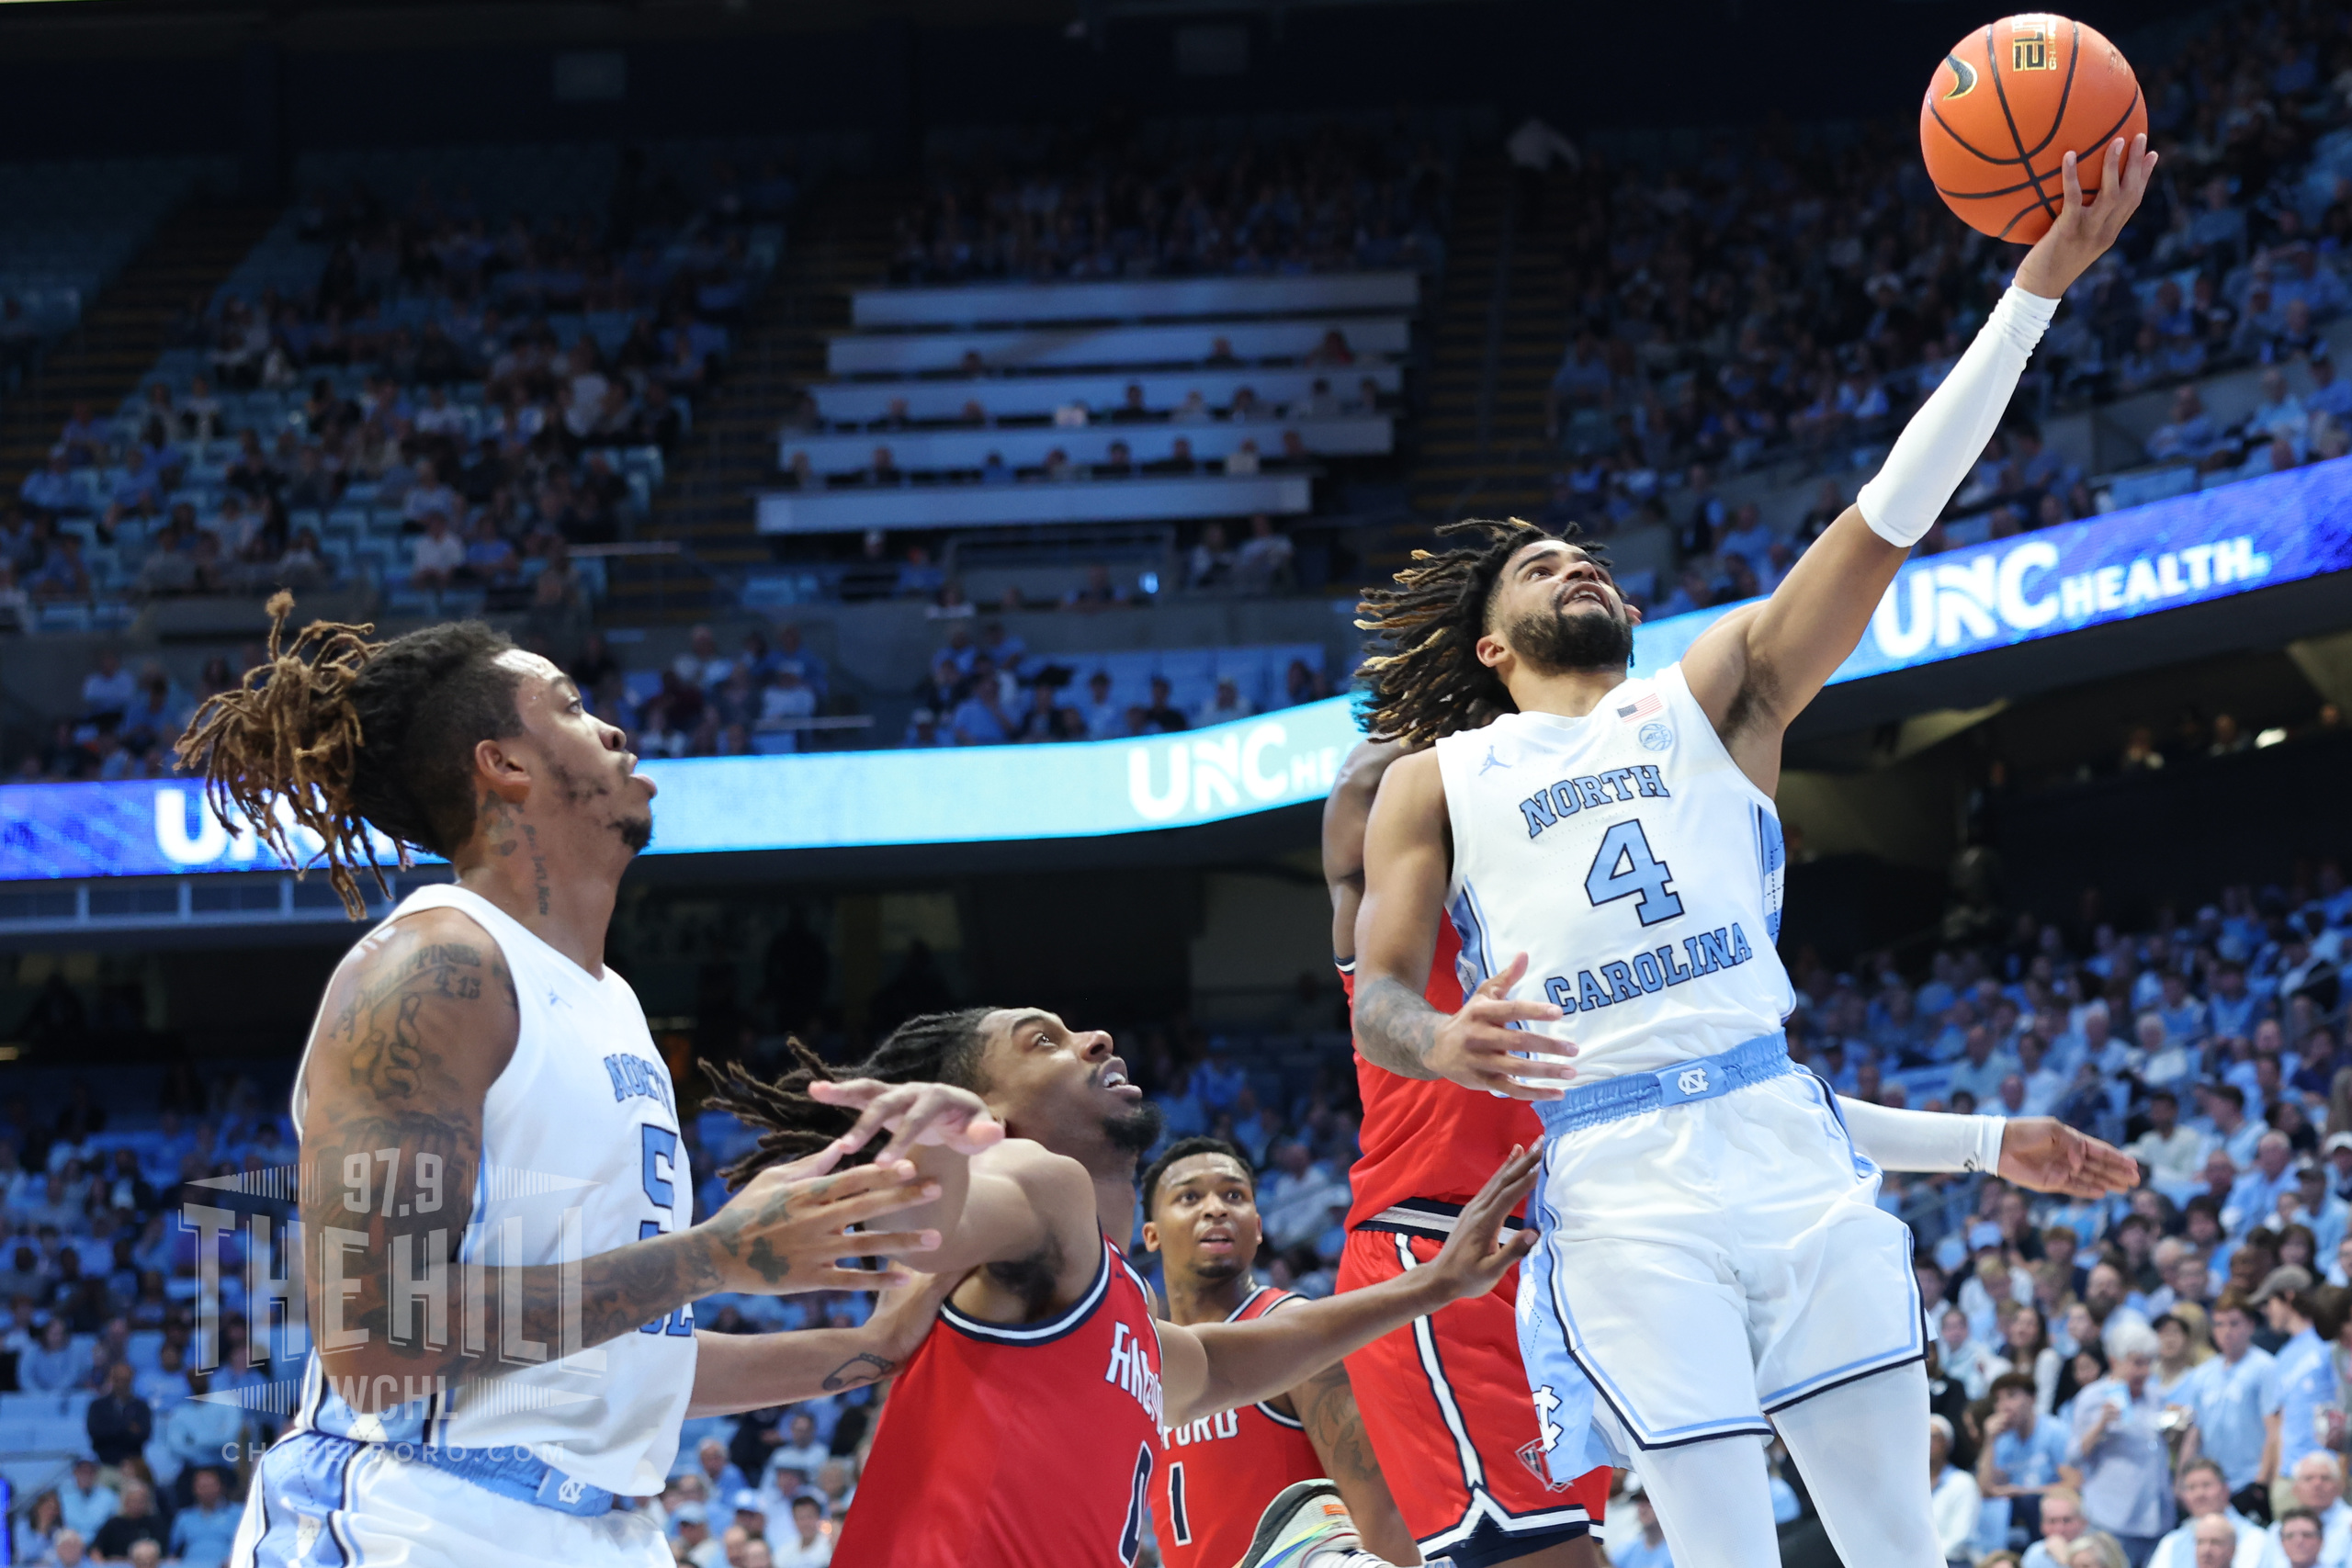 UNC Men’s Basketball vs. UC Riverside: How to Watch, Streaming Options and Tipoff Time